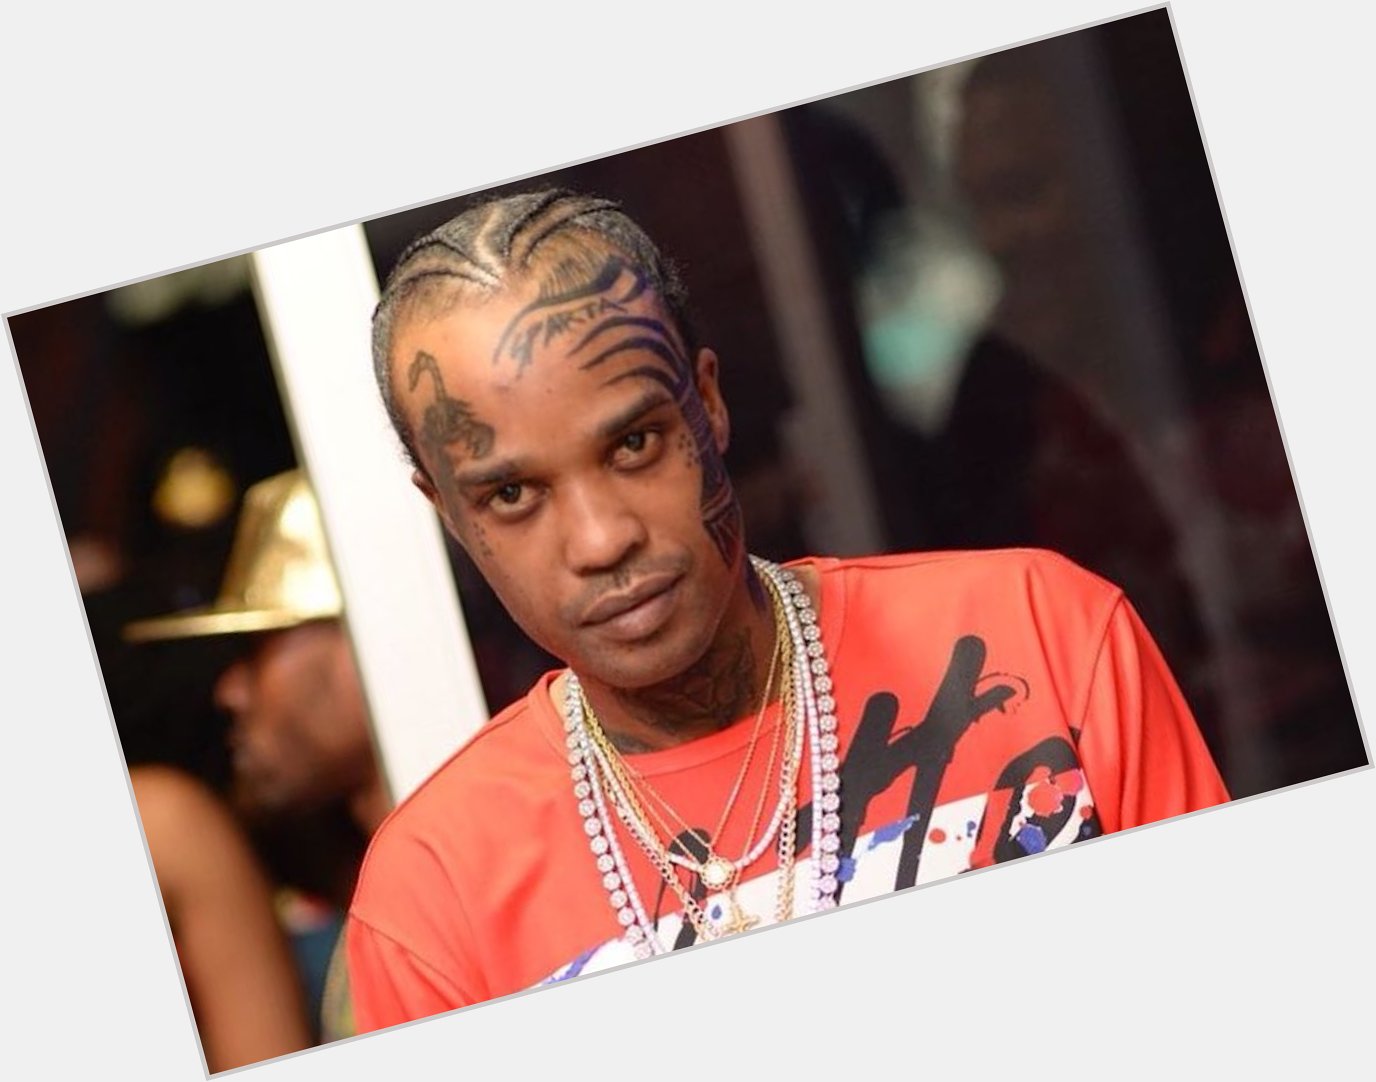 Tommy Lee Sparta hairstyle 3